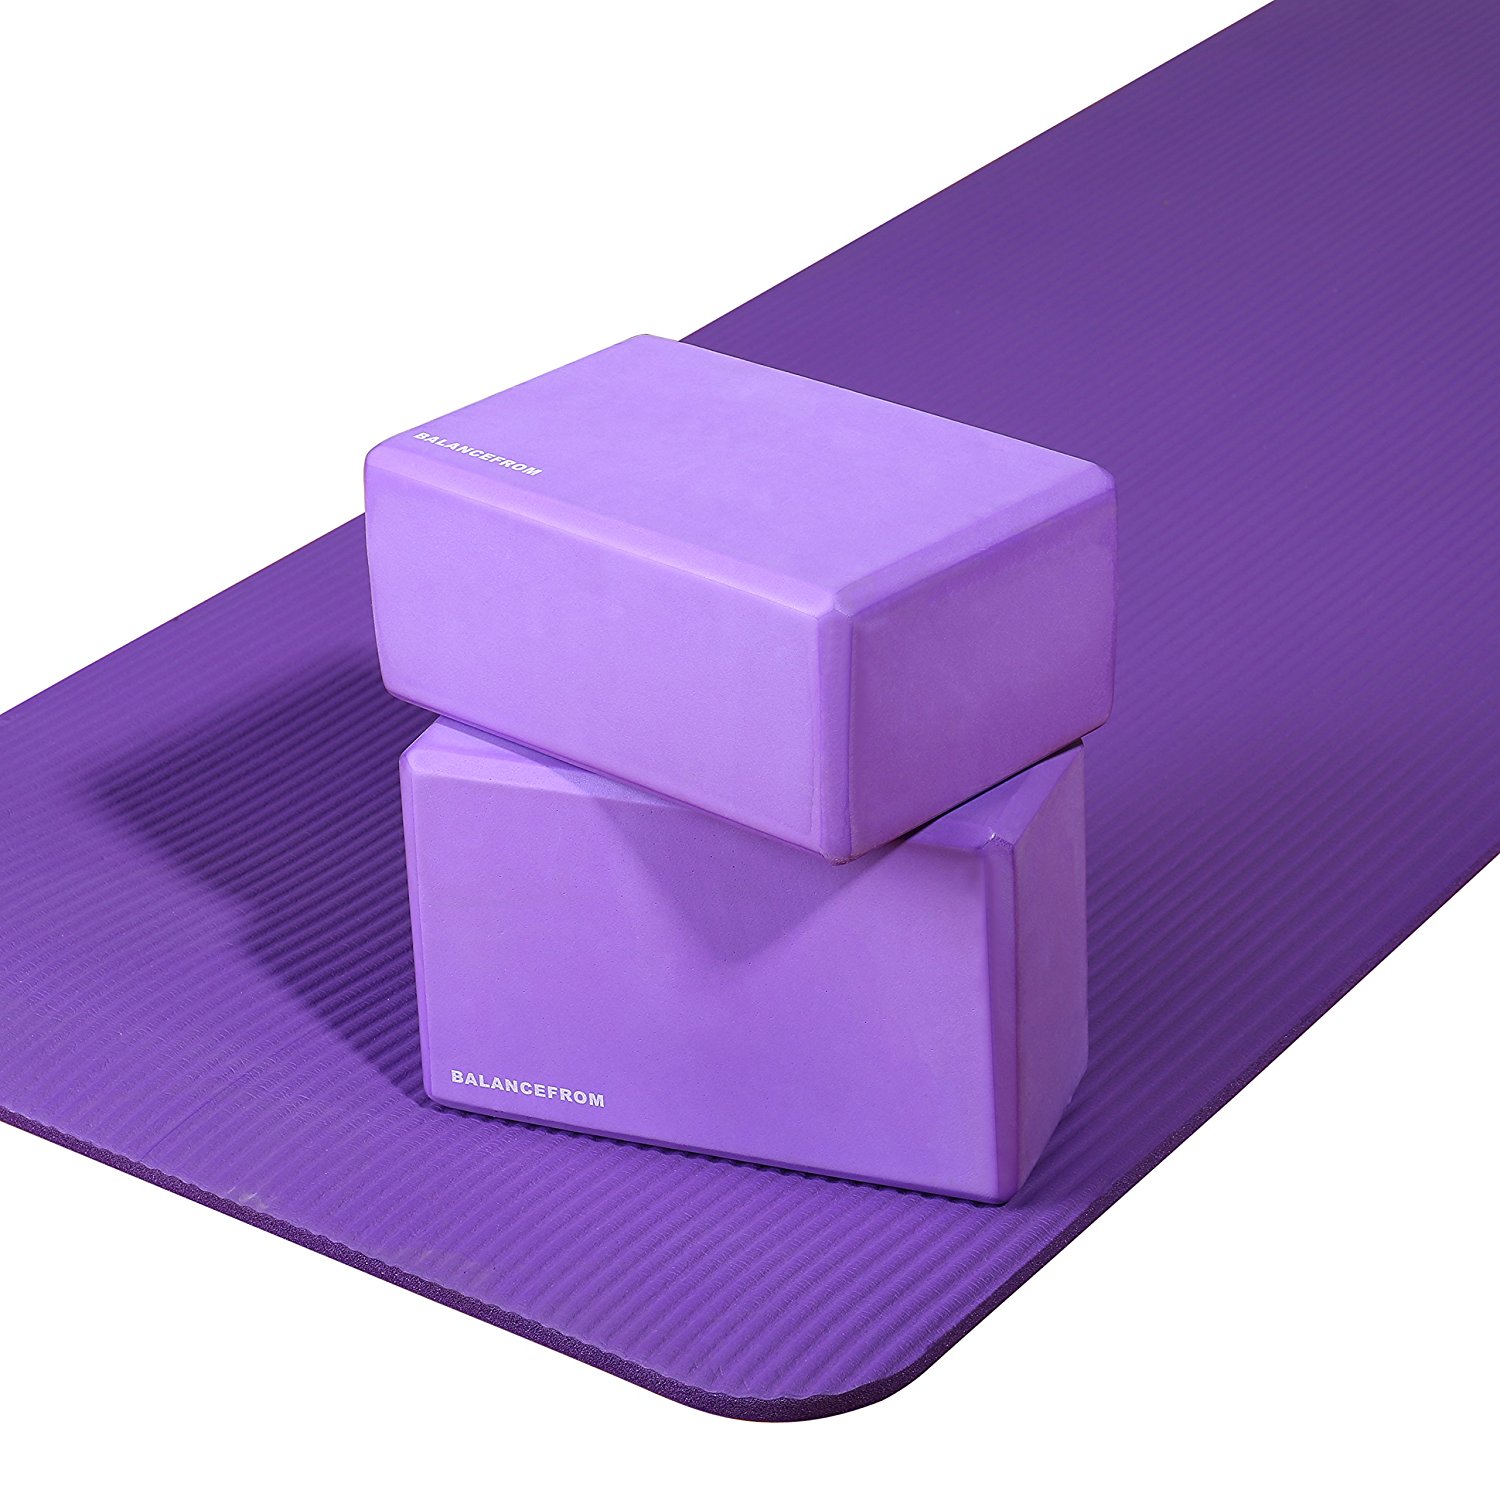 BalanceFrom All-Purpose 1/2 In. High Density Foam Exercise Yoga Mat Anti-Tear with Carrying Strap, Purple - image 5 of 5